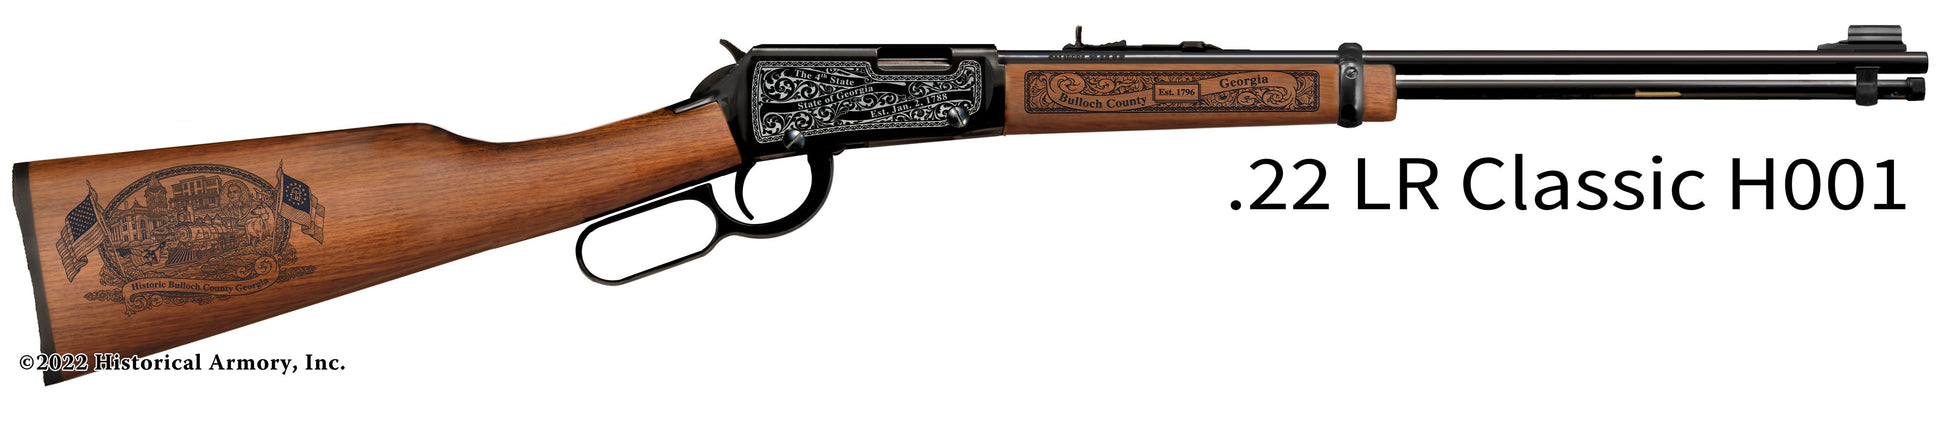 Bulloch County Georgia Engraved Henry H001 Rifle